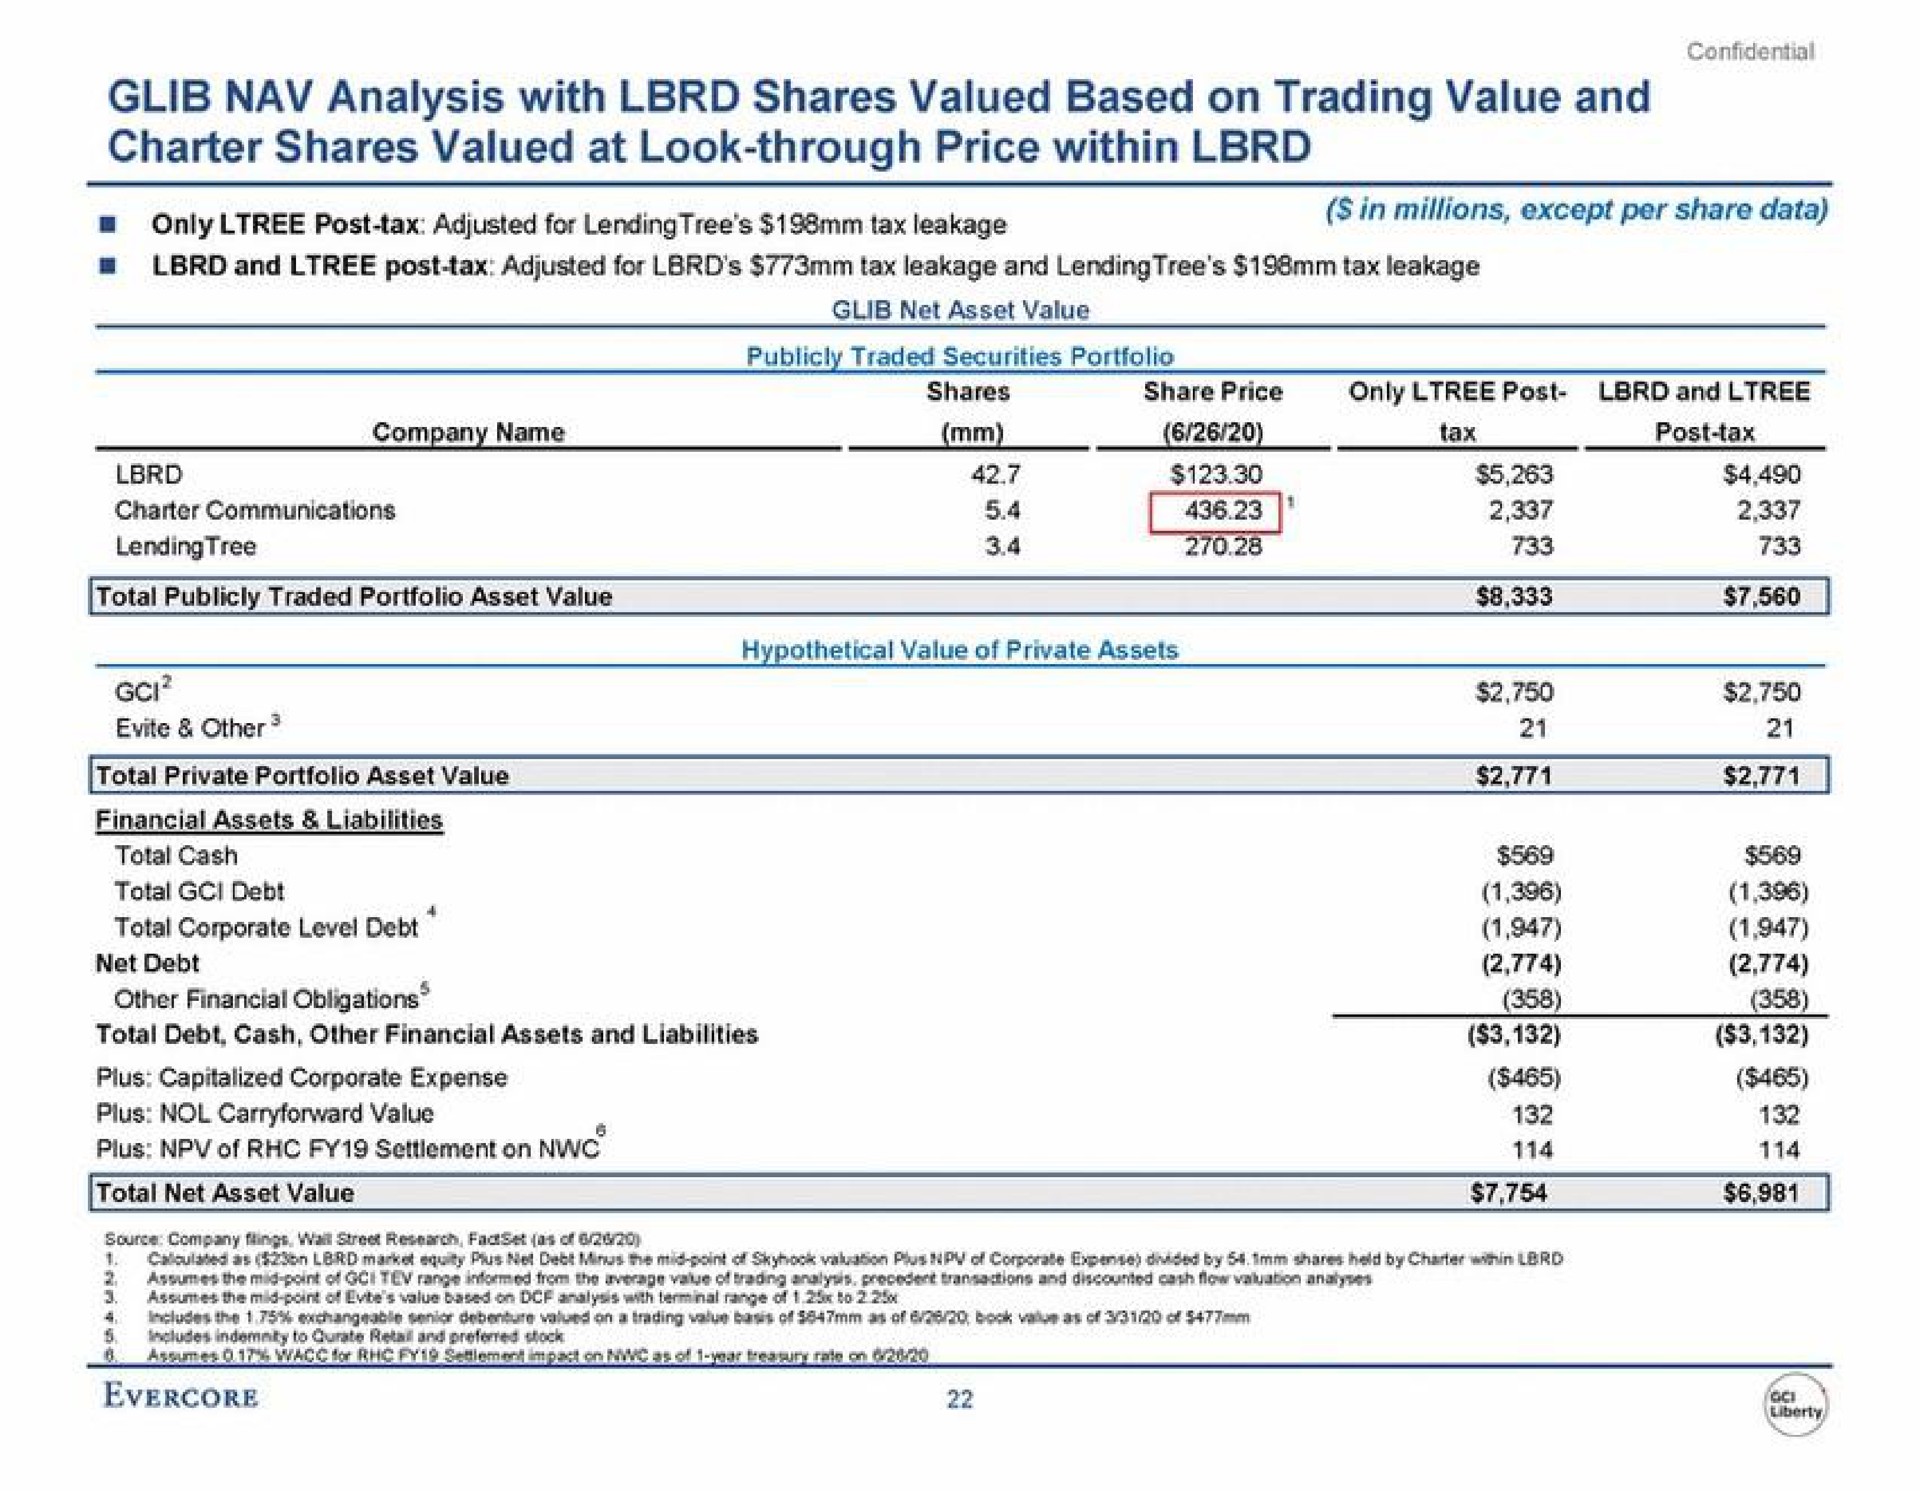 glib analysis with shares valued based on trading value and charter shares valued at look through price within only post tax adjusted for tax leakage in millions except per share data | Evercore